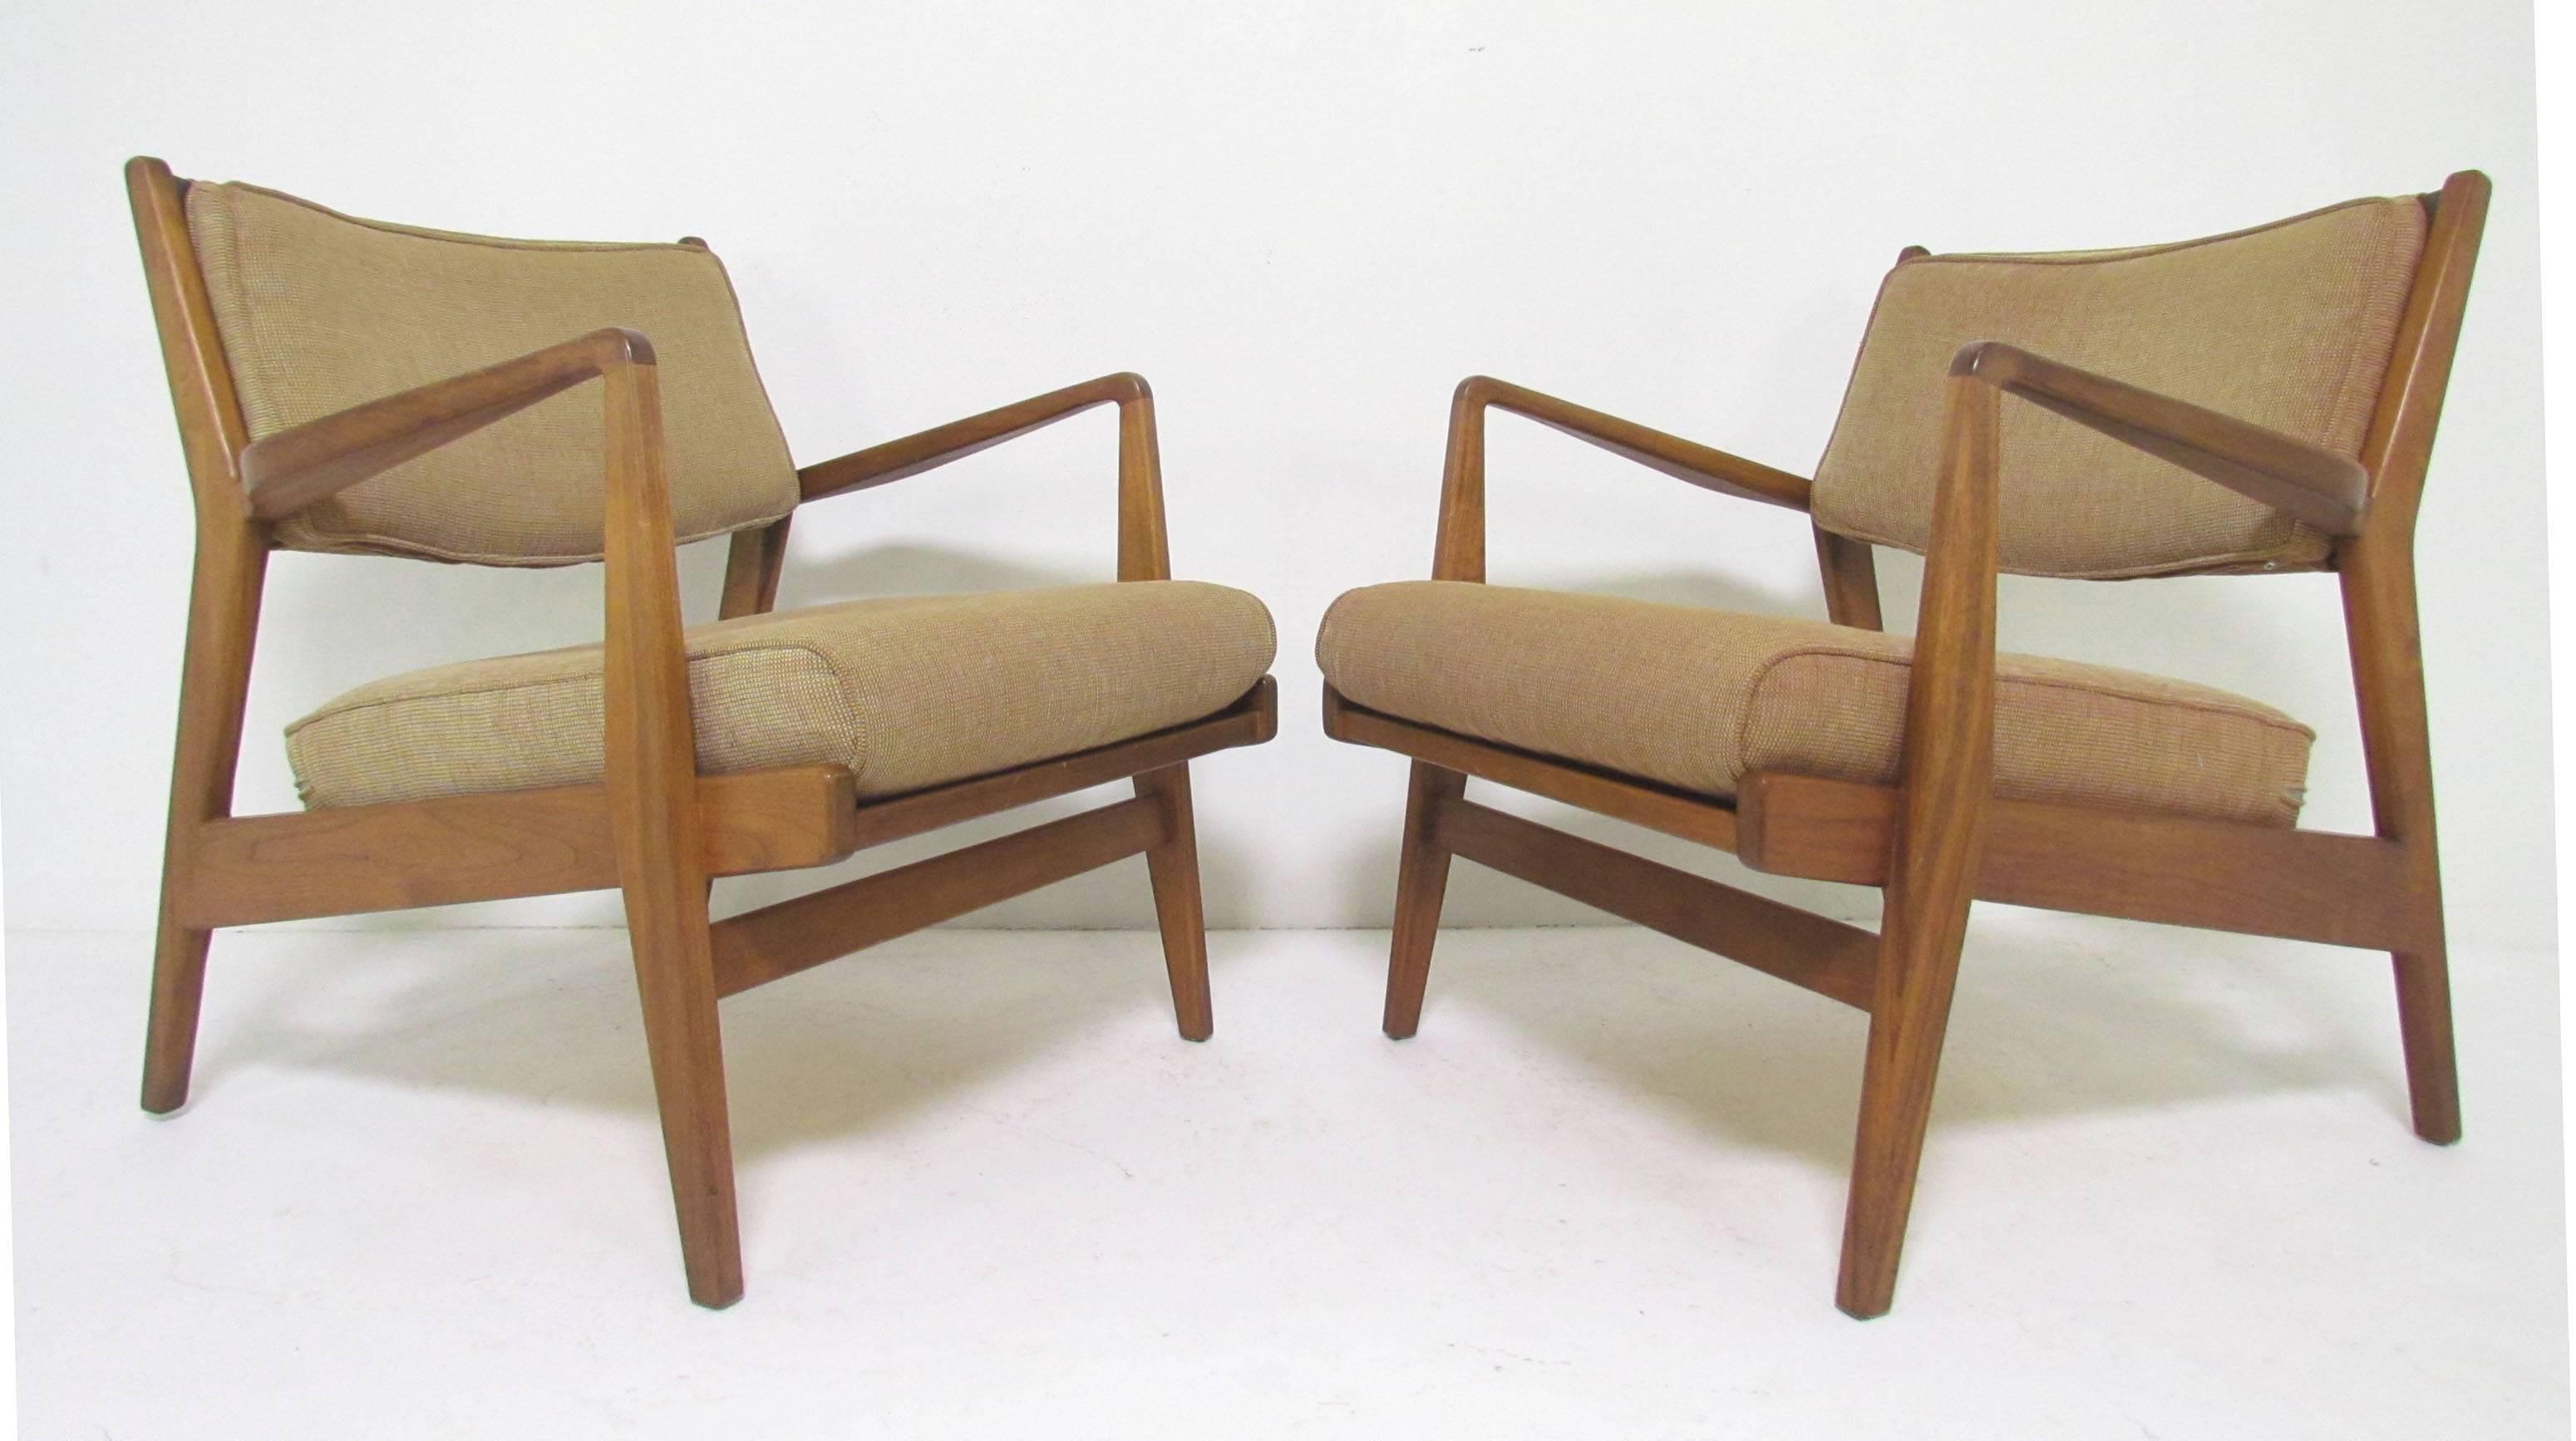 Classic pair of Mid-Century lounge chairs in walnut and original upholstery by Jens Risom. This model was originally designed in 1949 for the Caribe-Hilton Hotel in San Juan Puerto Rico in 1949. Both chairs signed with Jens Risom Design labels and